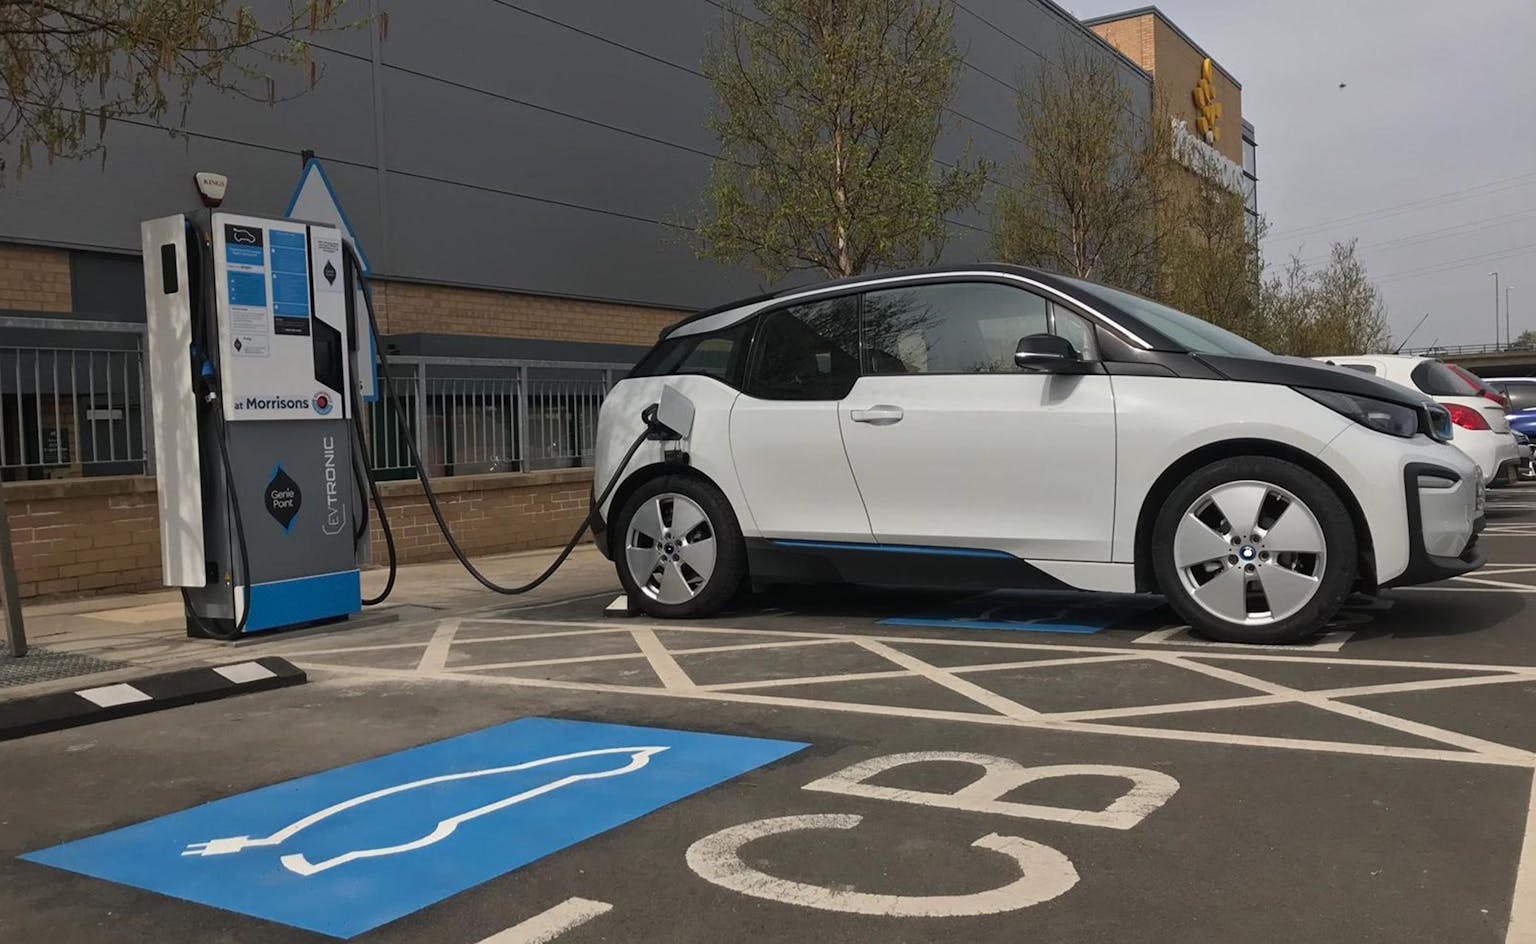 An electric vehicle plugged in to a charging spot outside a popular chain supermarket